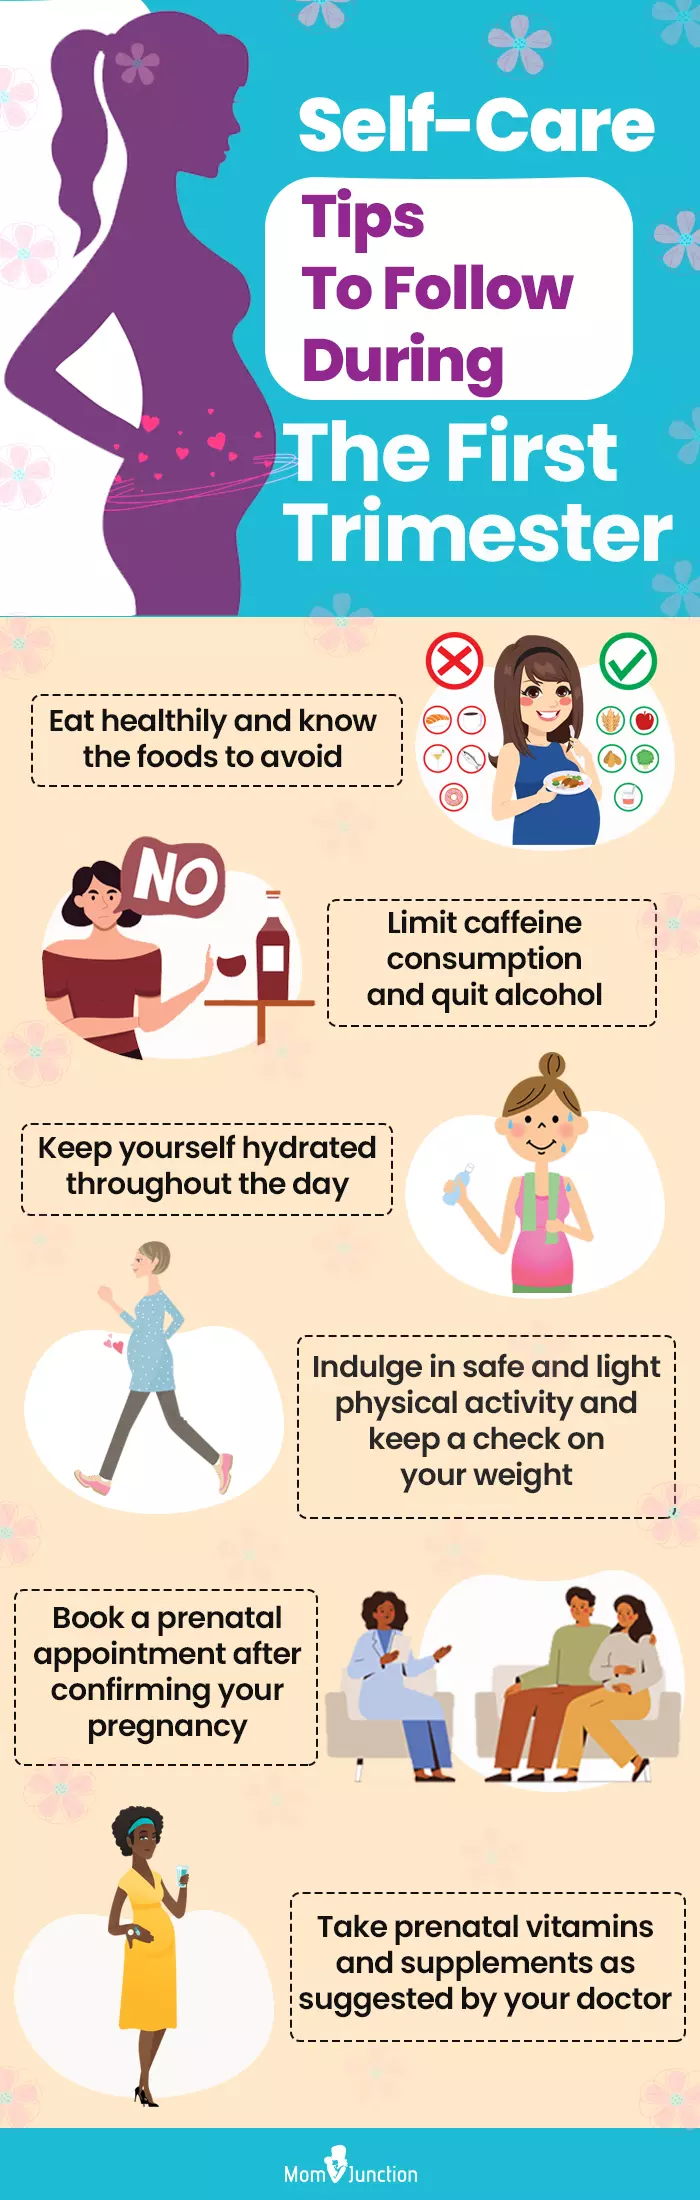 self care tips to follow during the first trimester (infographic)